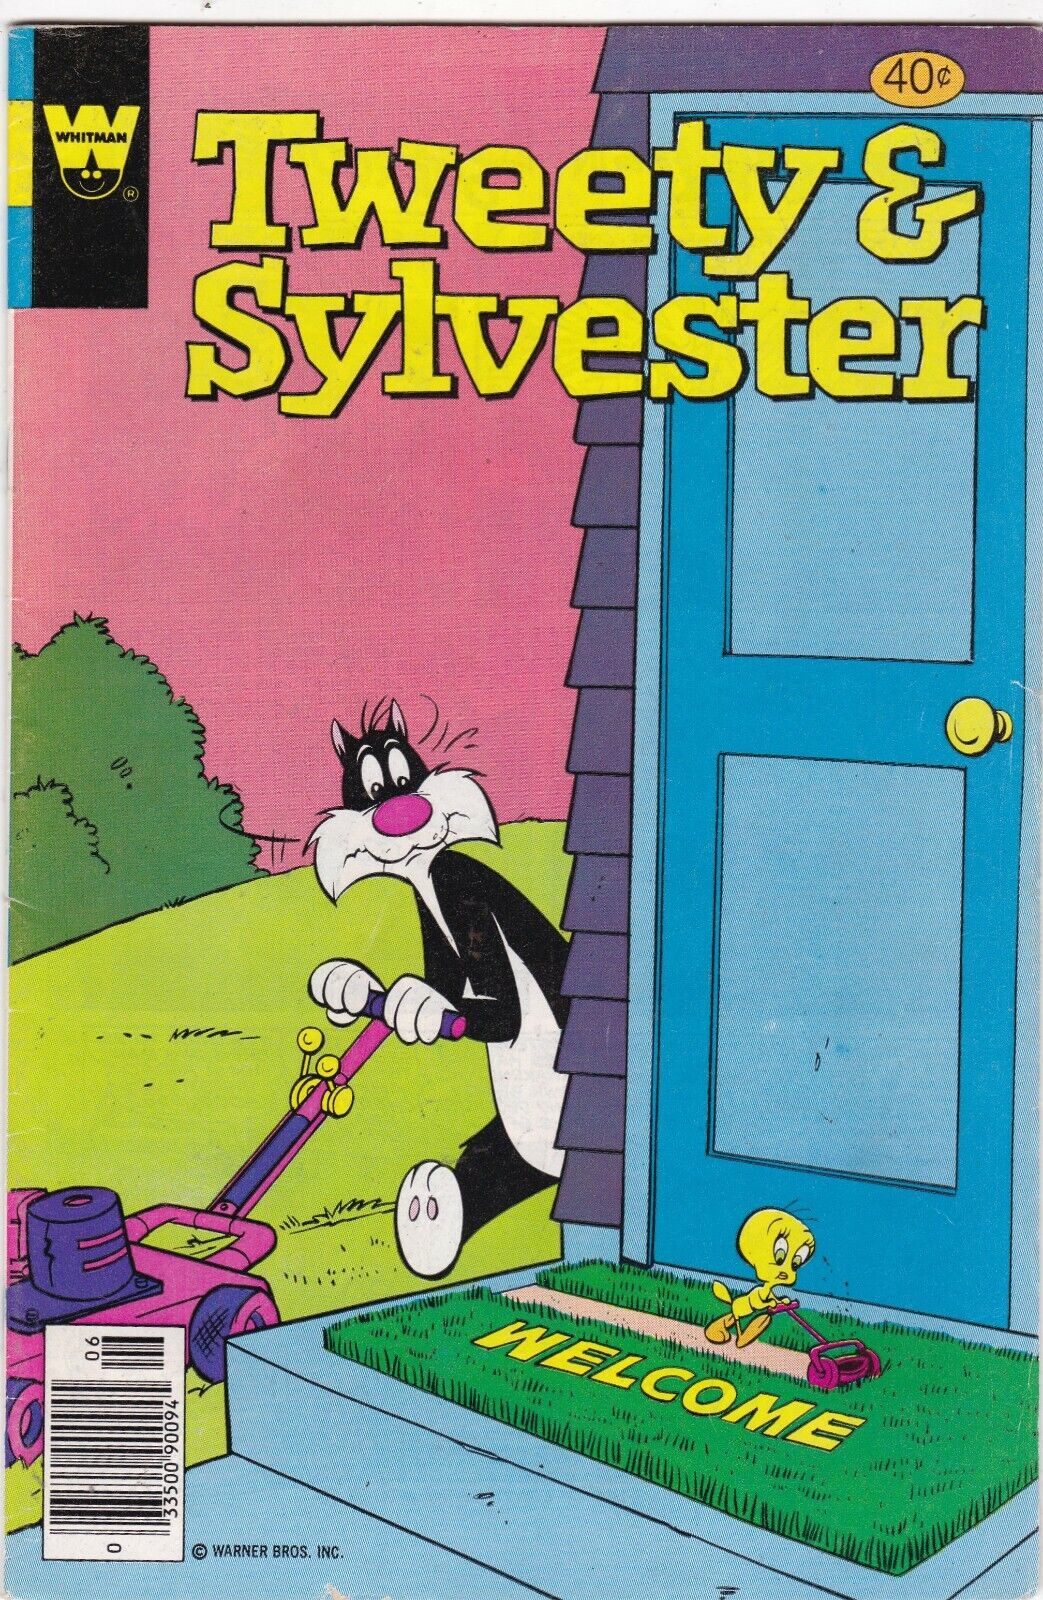 TWEETY AND SYLVESTER #97 Whitman  (Gold Key Comics, Looney Tunes Bugs Bunny 1979